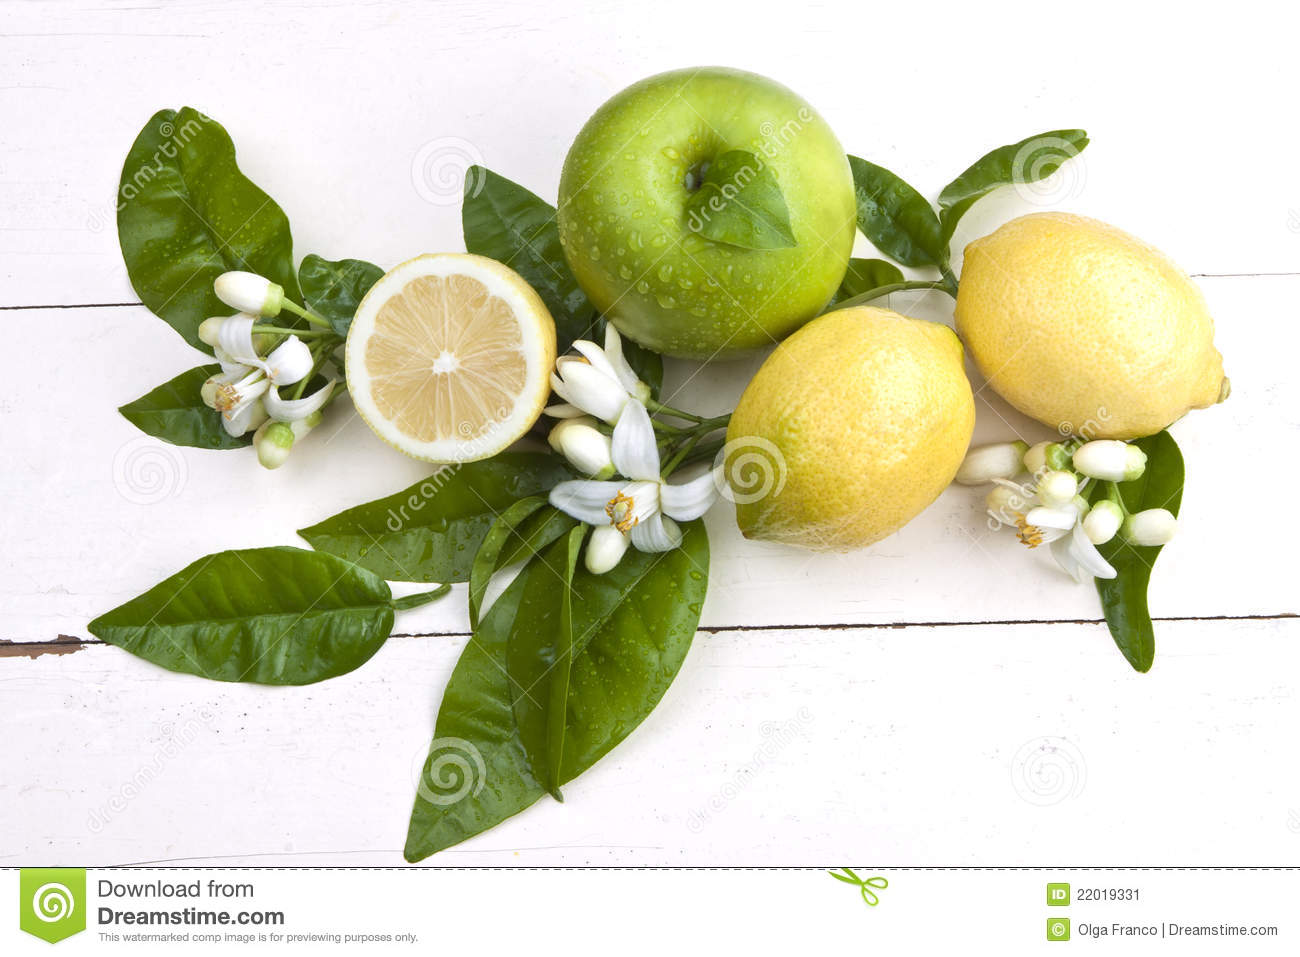 Lemons And Apple Composition With Lemon Blossoms On A Rustic Wooden    